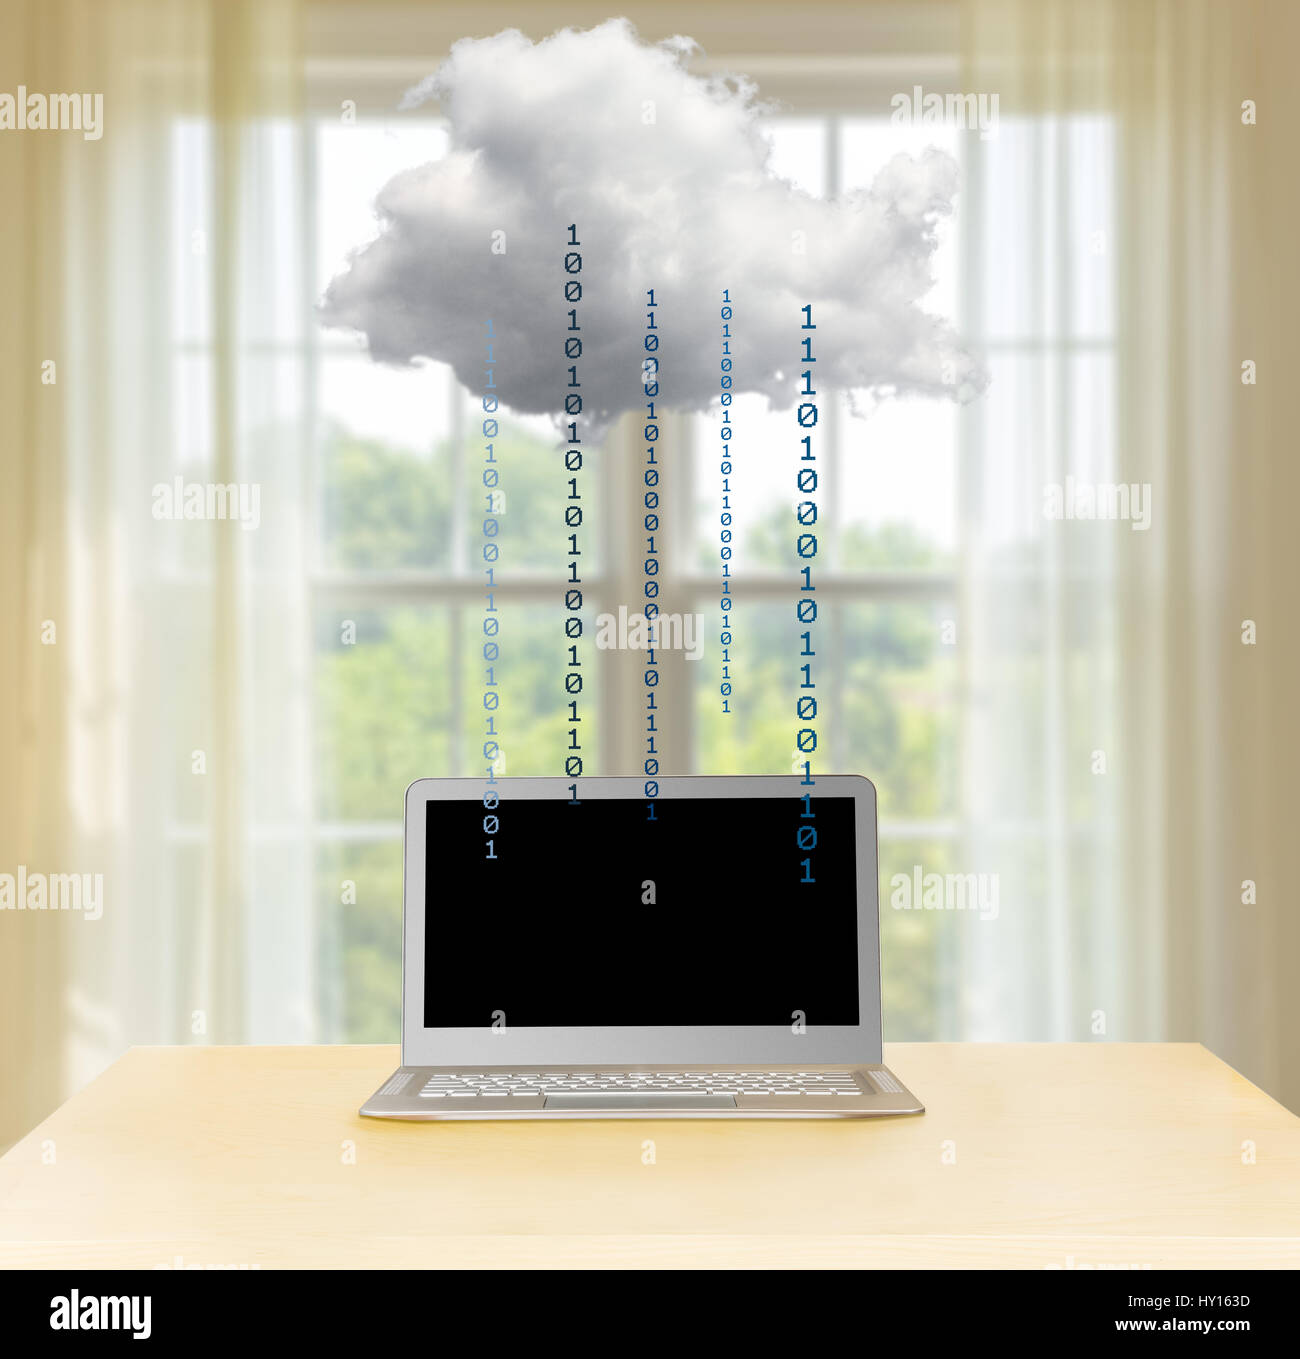 Personal cloud computing at home concept - home laptop connected to applications in the cloud - data technology concepts Stock Photo